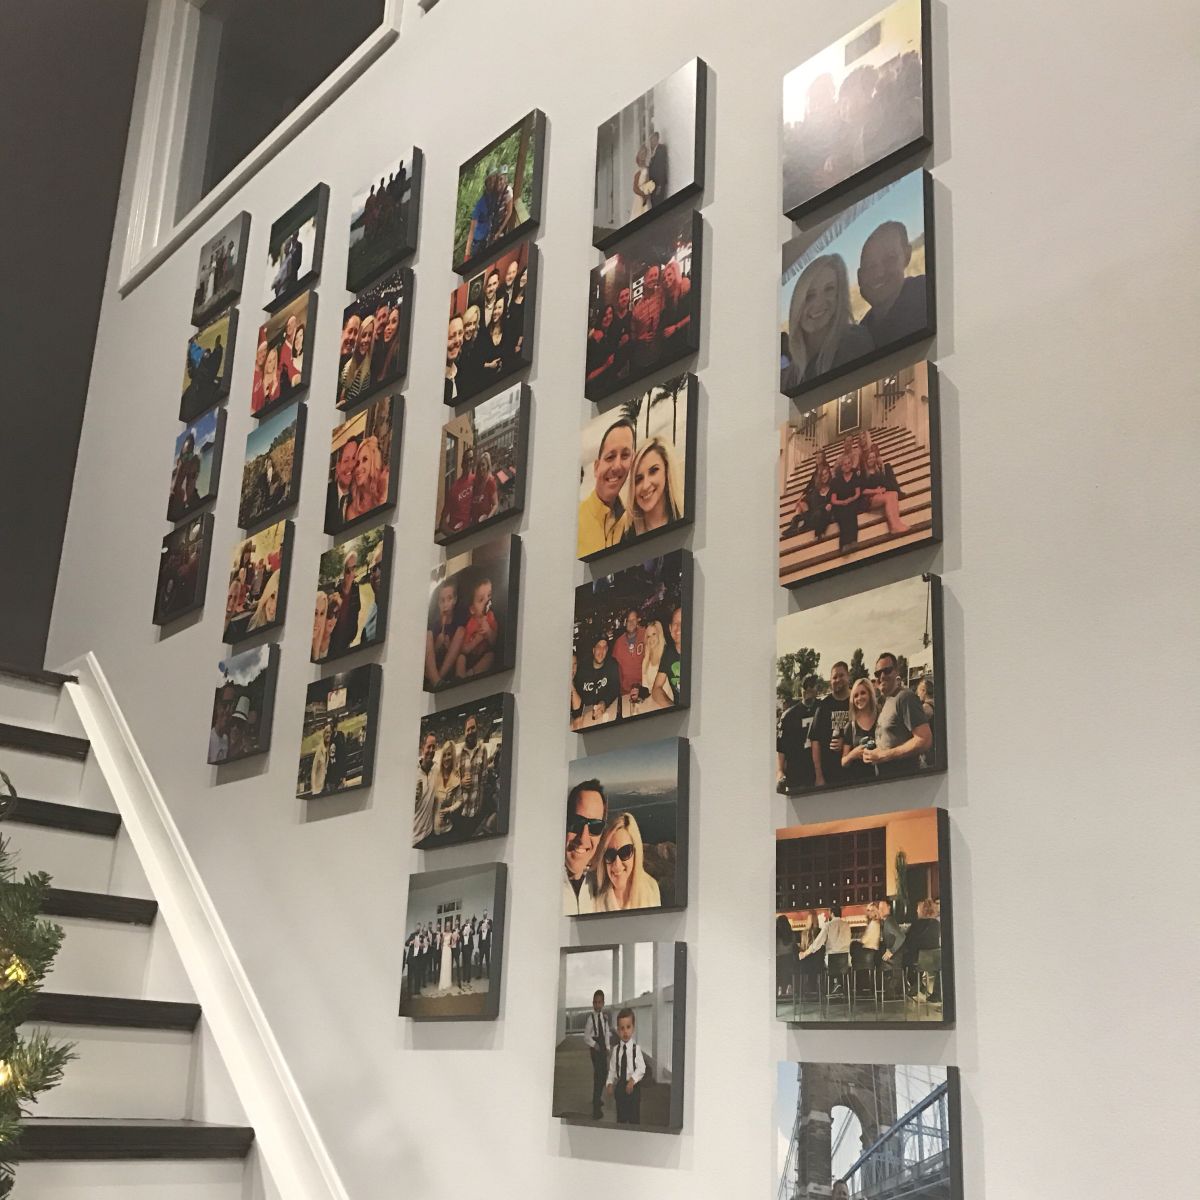 Easy Photo Wall Decor - Mixtiles review and installation - Life Sew Savory